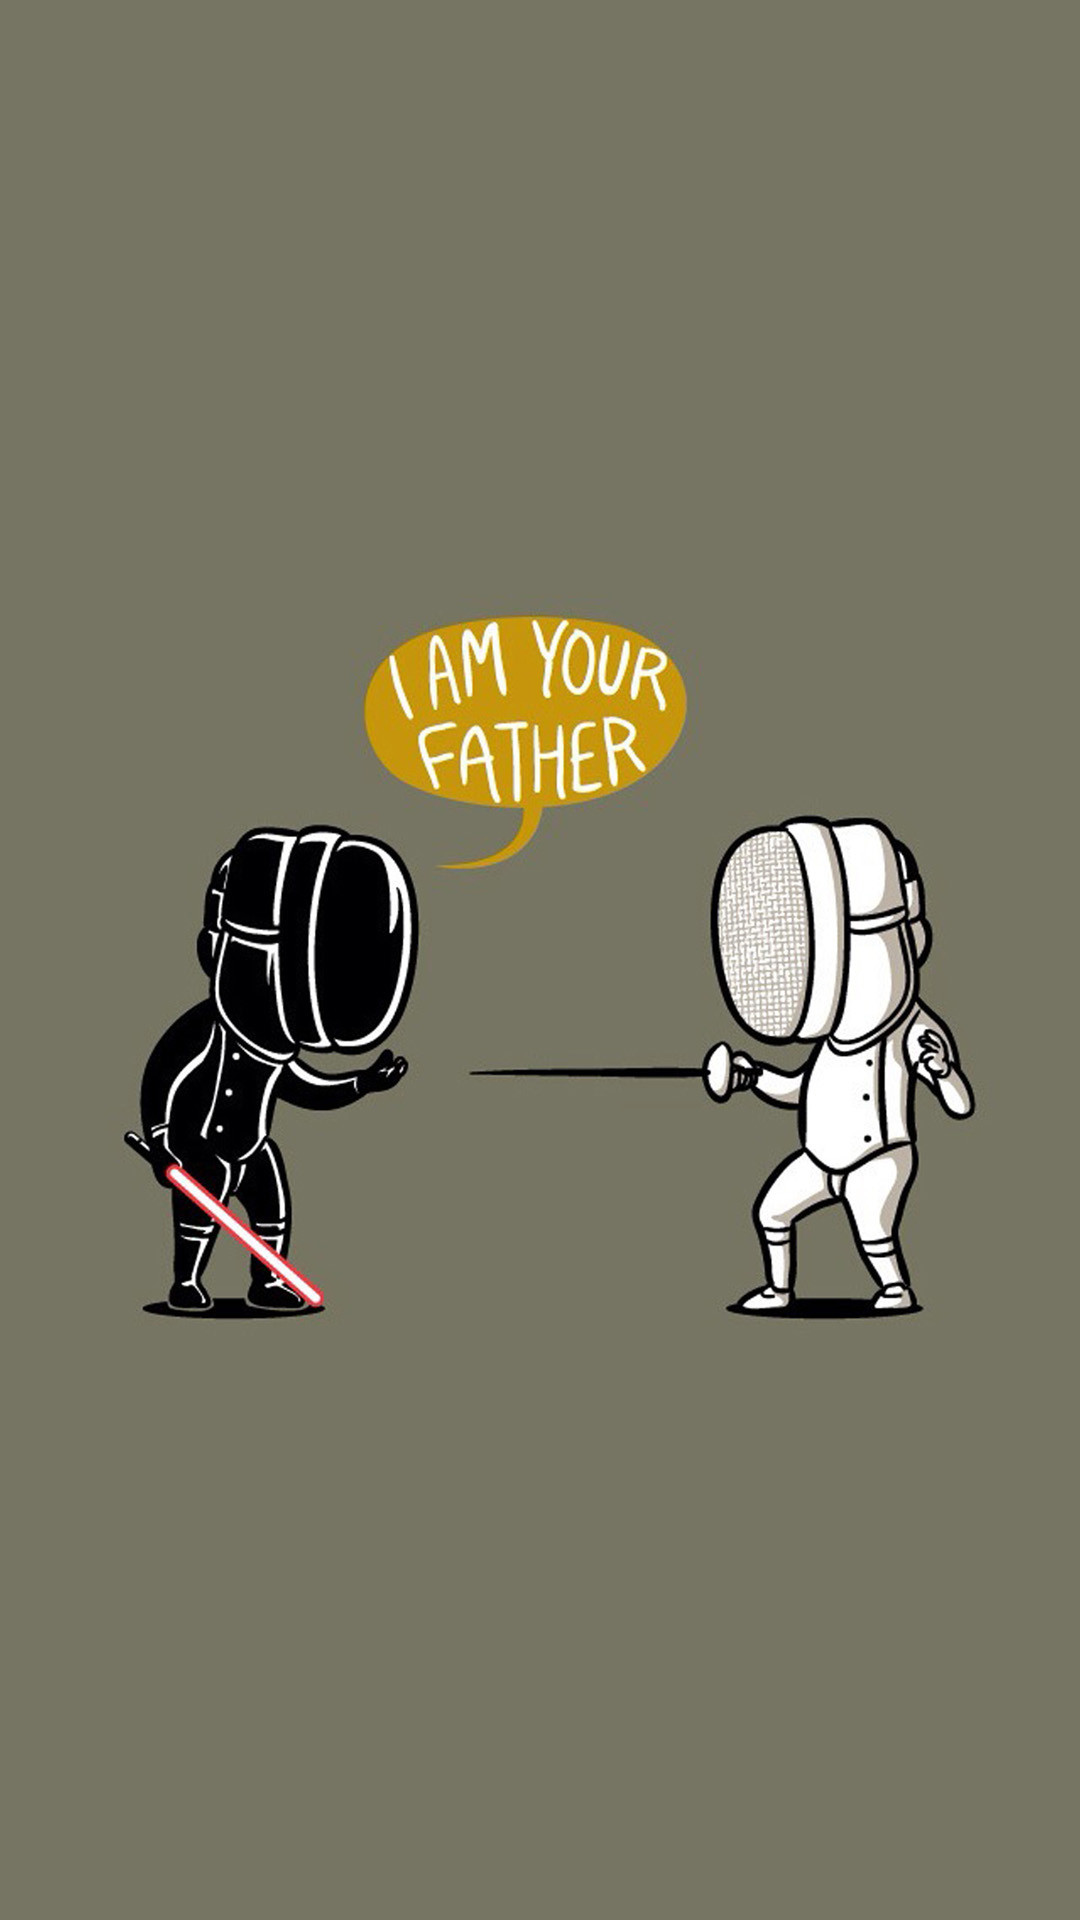 Funny archives of 6 wallpapers for iphone samsung and other